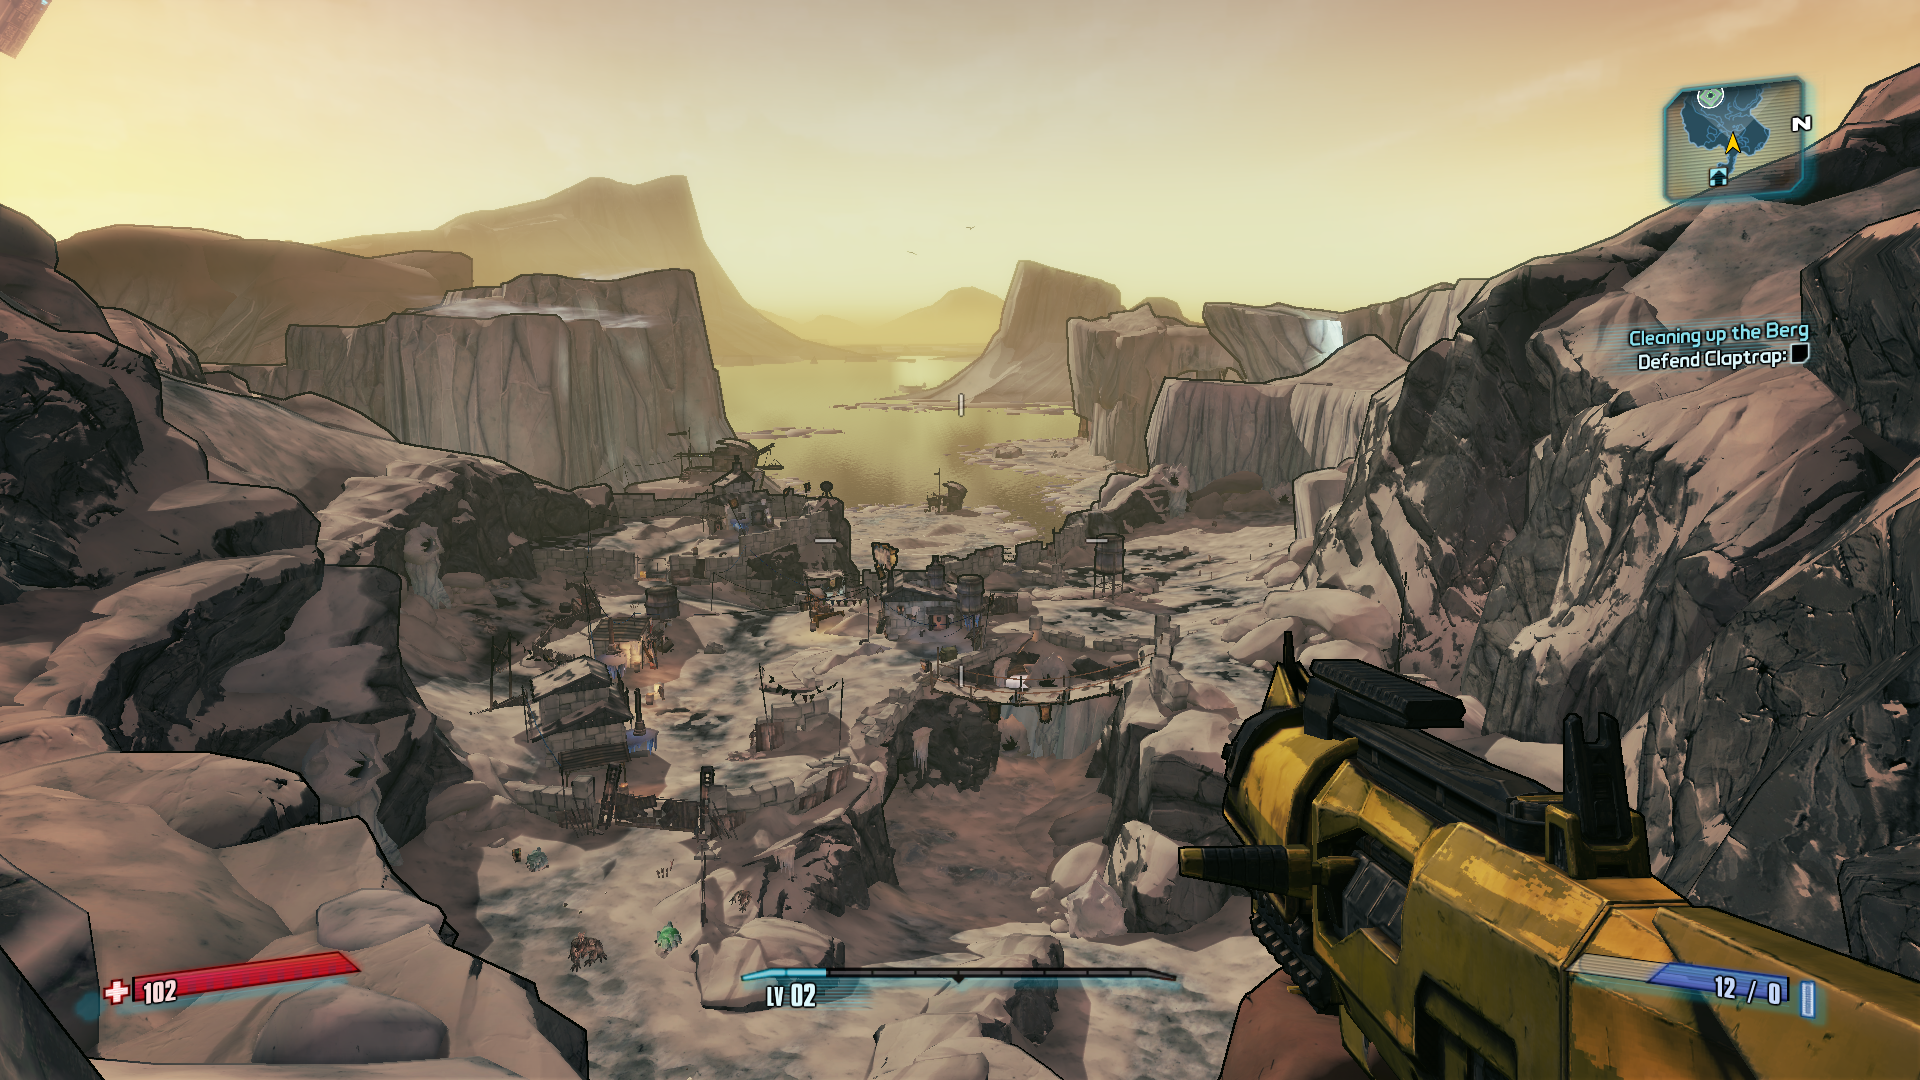 Borderlands 2 running at full, glorious 1080p on PC. As well as the impressive draw distances possible here, the game takes full advantage of physics-based ...